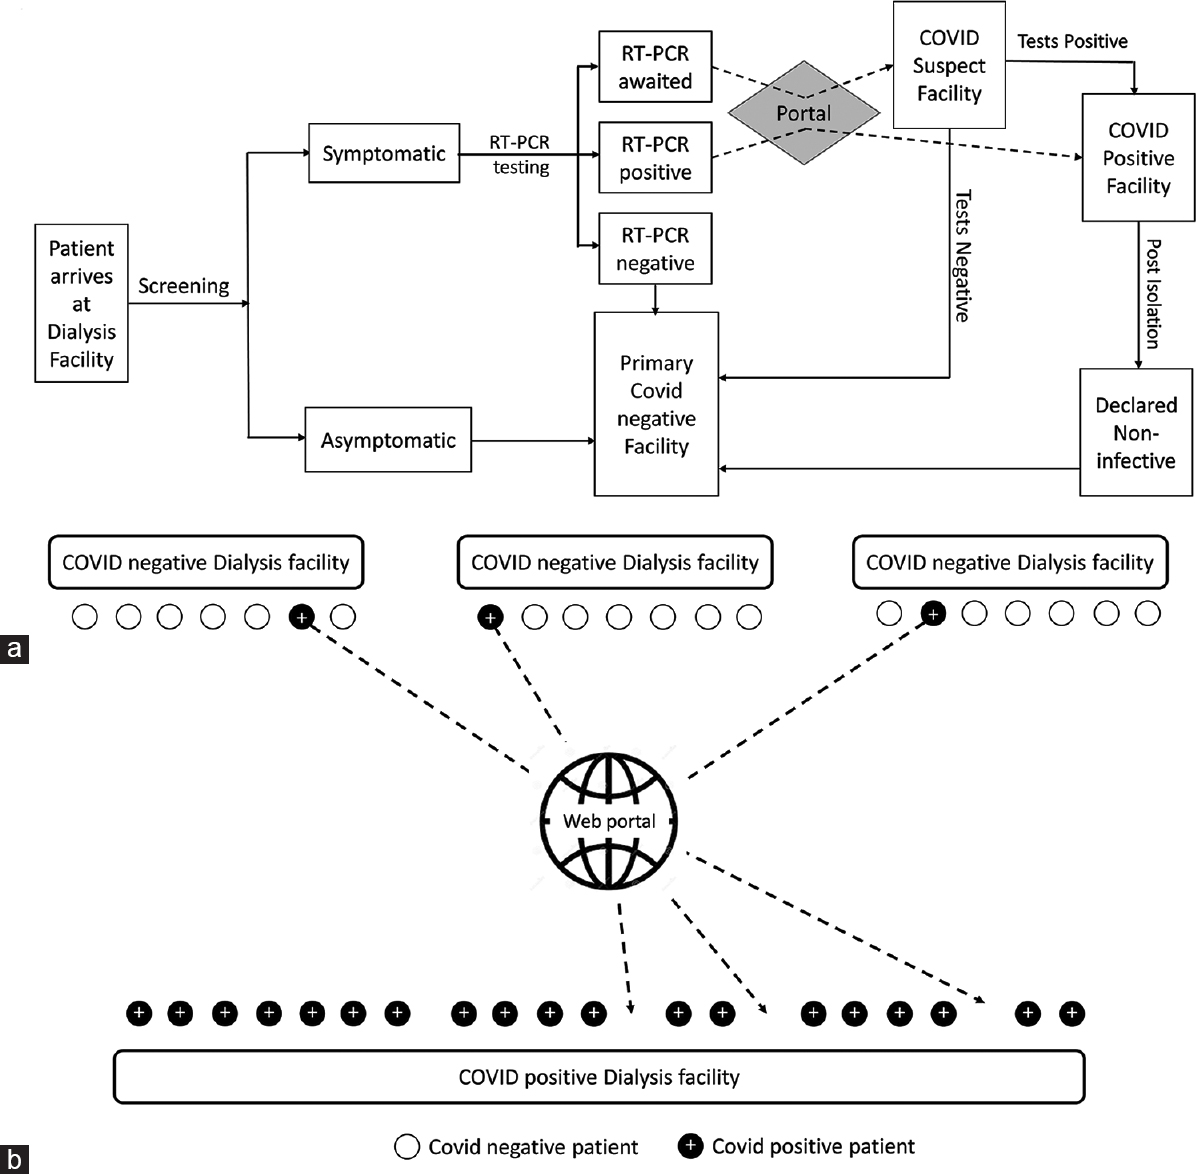 COVID-19 positive/suspect MHD patient handling and assignment to designated hemodialysis facilities. (a) Flow diagram – primary screening, testing, enrollment, and transfer. (b) Schematic of portal-directed assignment of patients to designated hemodialysis facilities. (COVID-19, Coronavirus disease 2019; MHD, maintenance hemodialysis; RT-PCR, reverse transcription polymerase chain reaction)